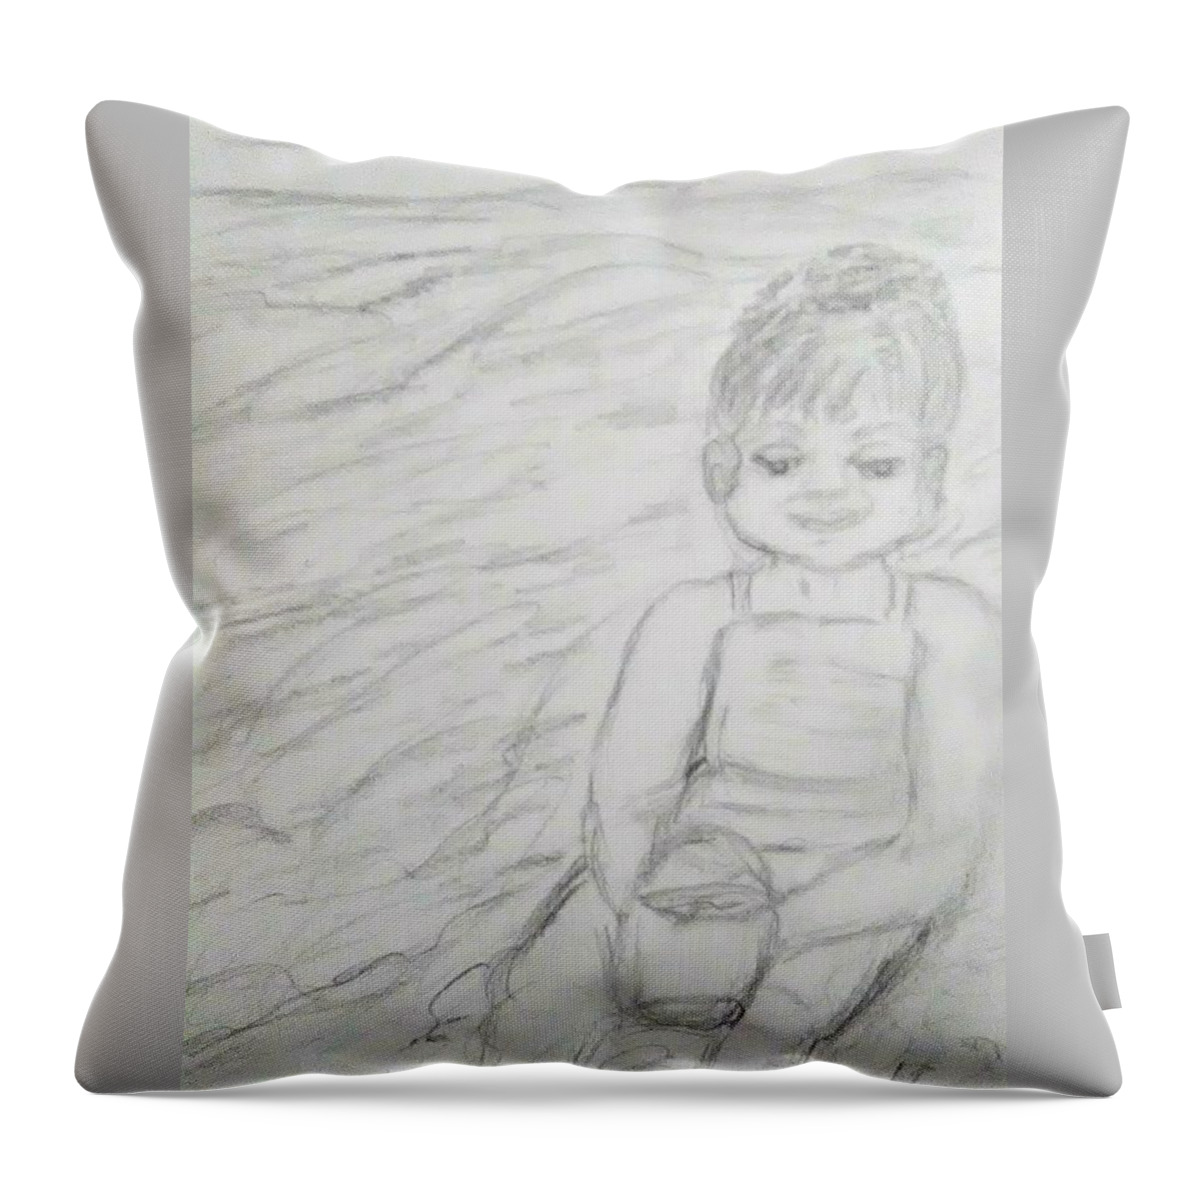 Children Throw Pillow featuring the drawing  Beach Baby by Suzanne Berthier